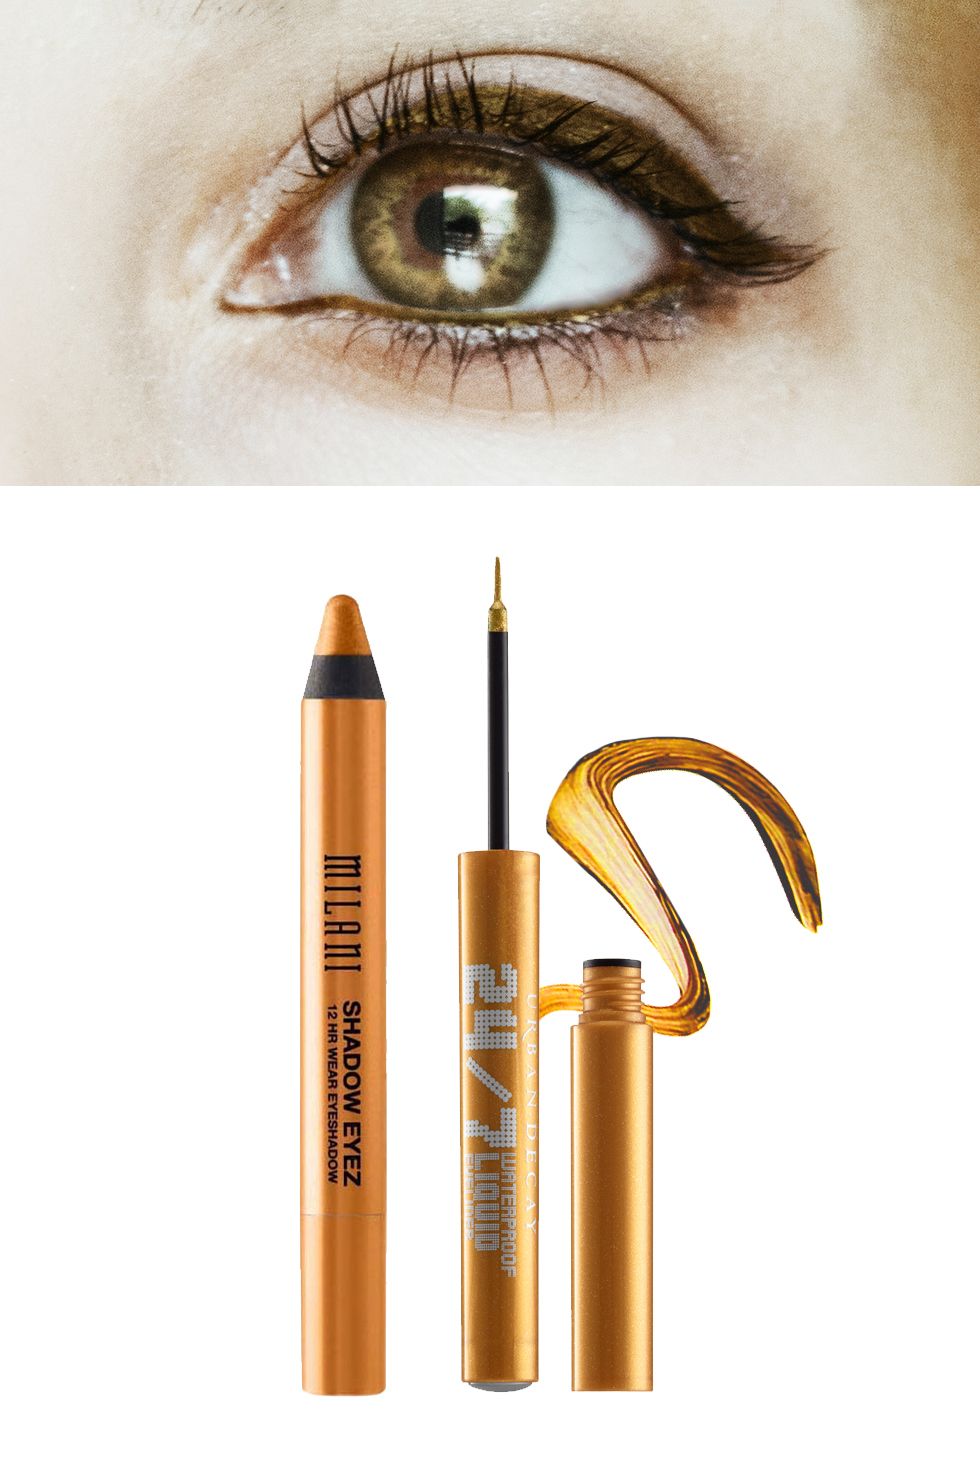 <p>A warm metallic gold will accentuate the yellow flecks around the inner part of the iris, making them shimmer, and your eyes look even brighter.</p><p>Try: <a href="http://www.yslbeautyus.com/dessin-du-regard-waterproof/497YSL.html?dwvar_497YSL_color=No1%20-%20Black%20Ink" target="_blank">Yves Saint Lauren Dessin Du Regard Waterproof</a> <span class="redactor-invisible-space"><a href="http://www.yslbeautyus.com/dessin-du-regard-waterproof/497YSL.html?dwvar_497YSL_color=No1%20-%20Black%20Ink"></a>($30) or <a href="http://www.urbandecay.com/24/7-waterproof-liquid-eyeliner/305.html" target="_blank">Urban Decay 24/7 Waterproof Liquid Liner</a> ($19).</span></p>